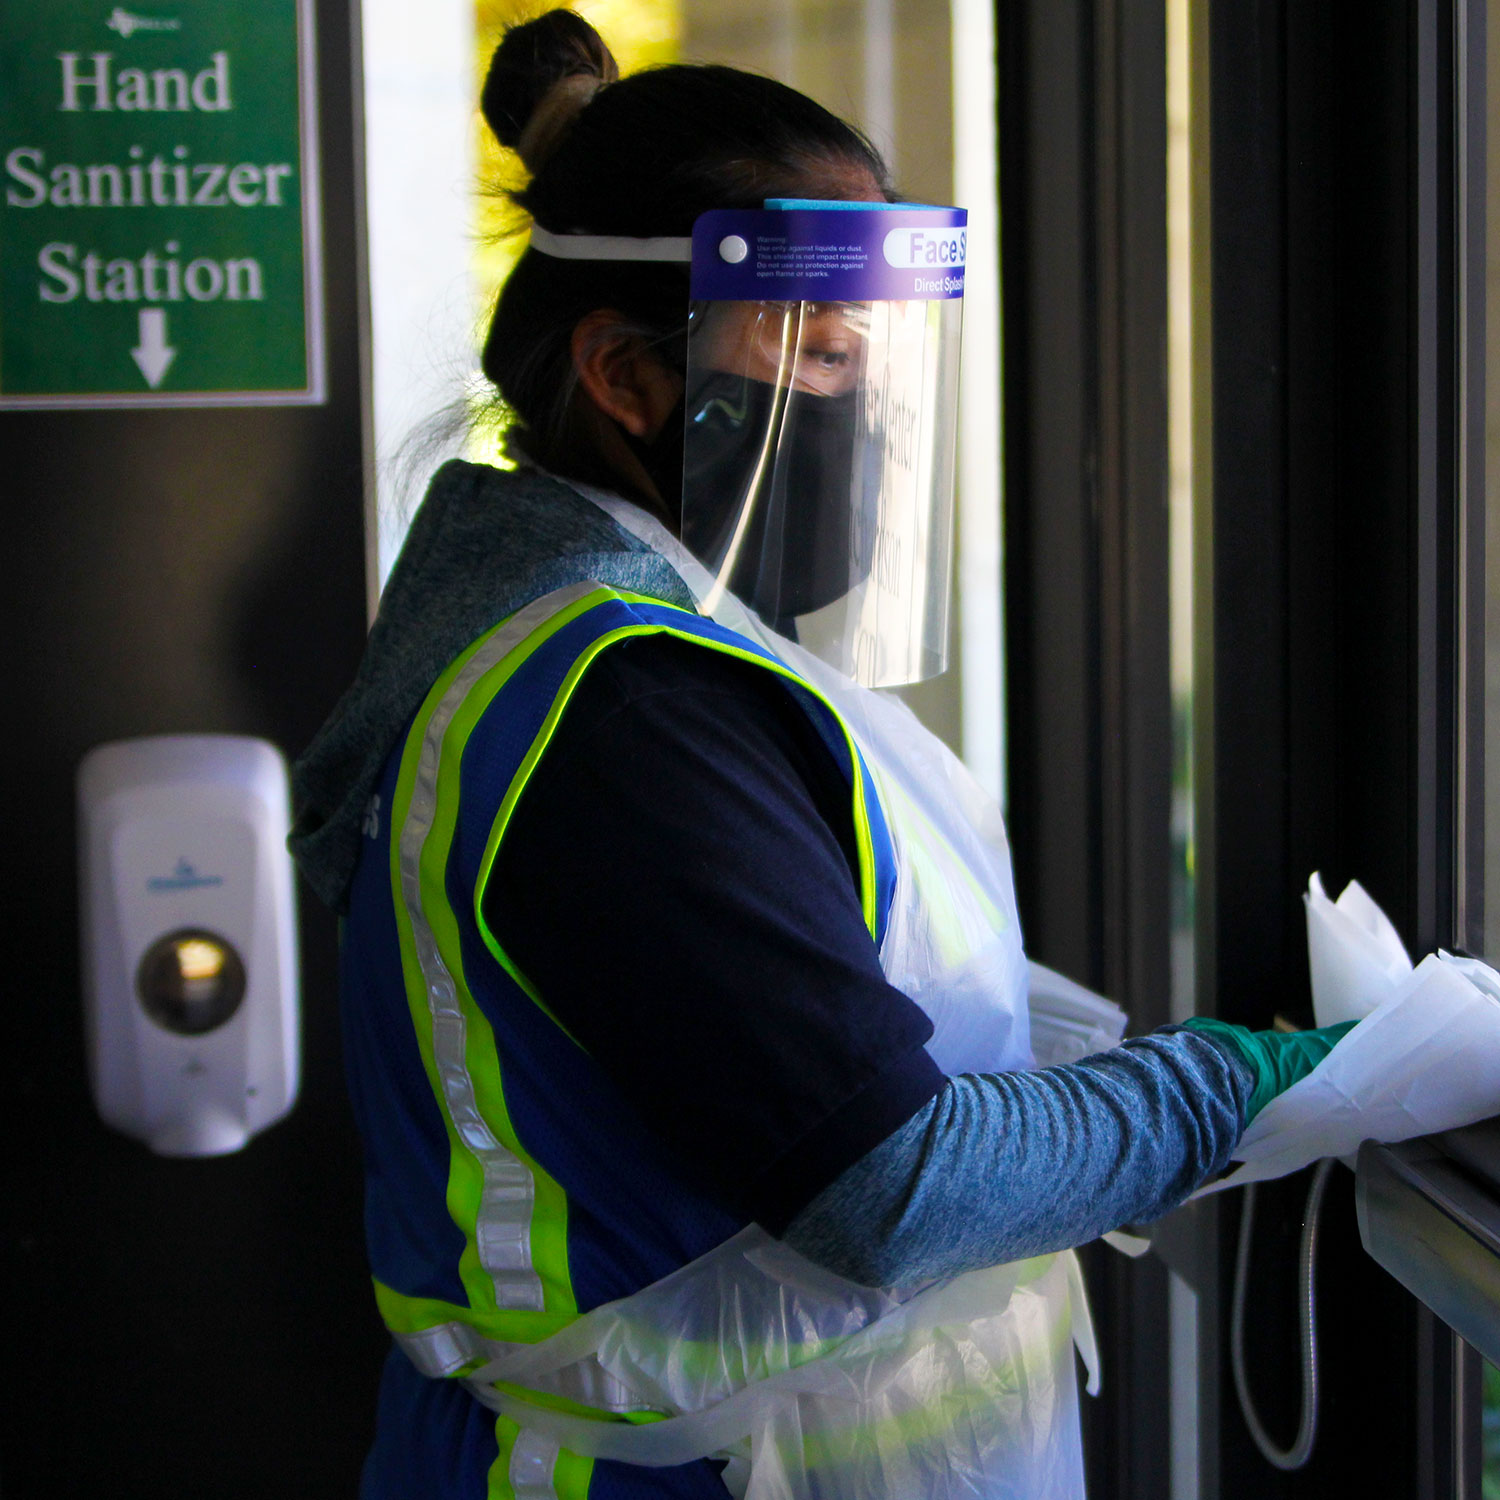 A custodial staff member in Personal Protective Equipment wiping a door handle.